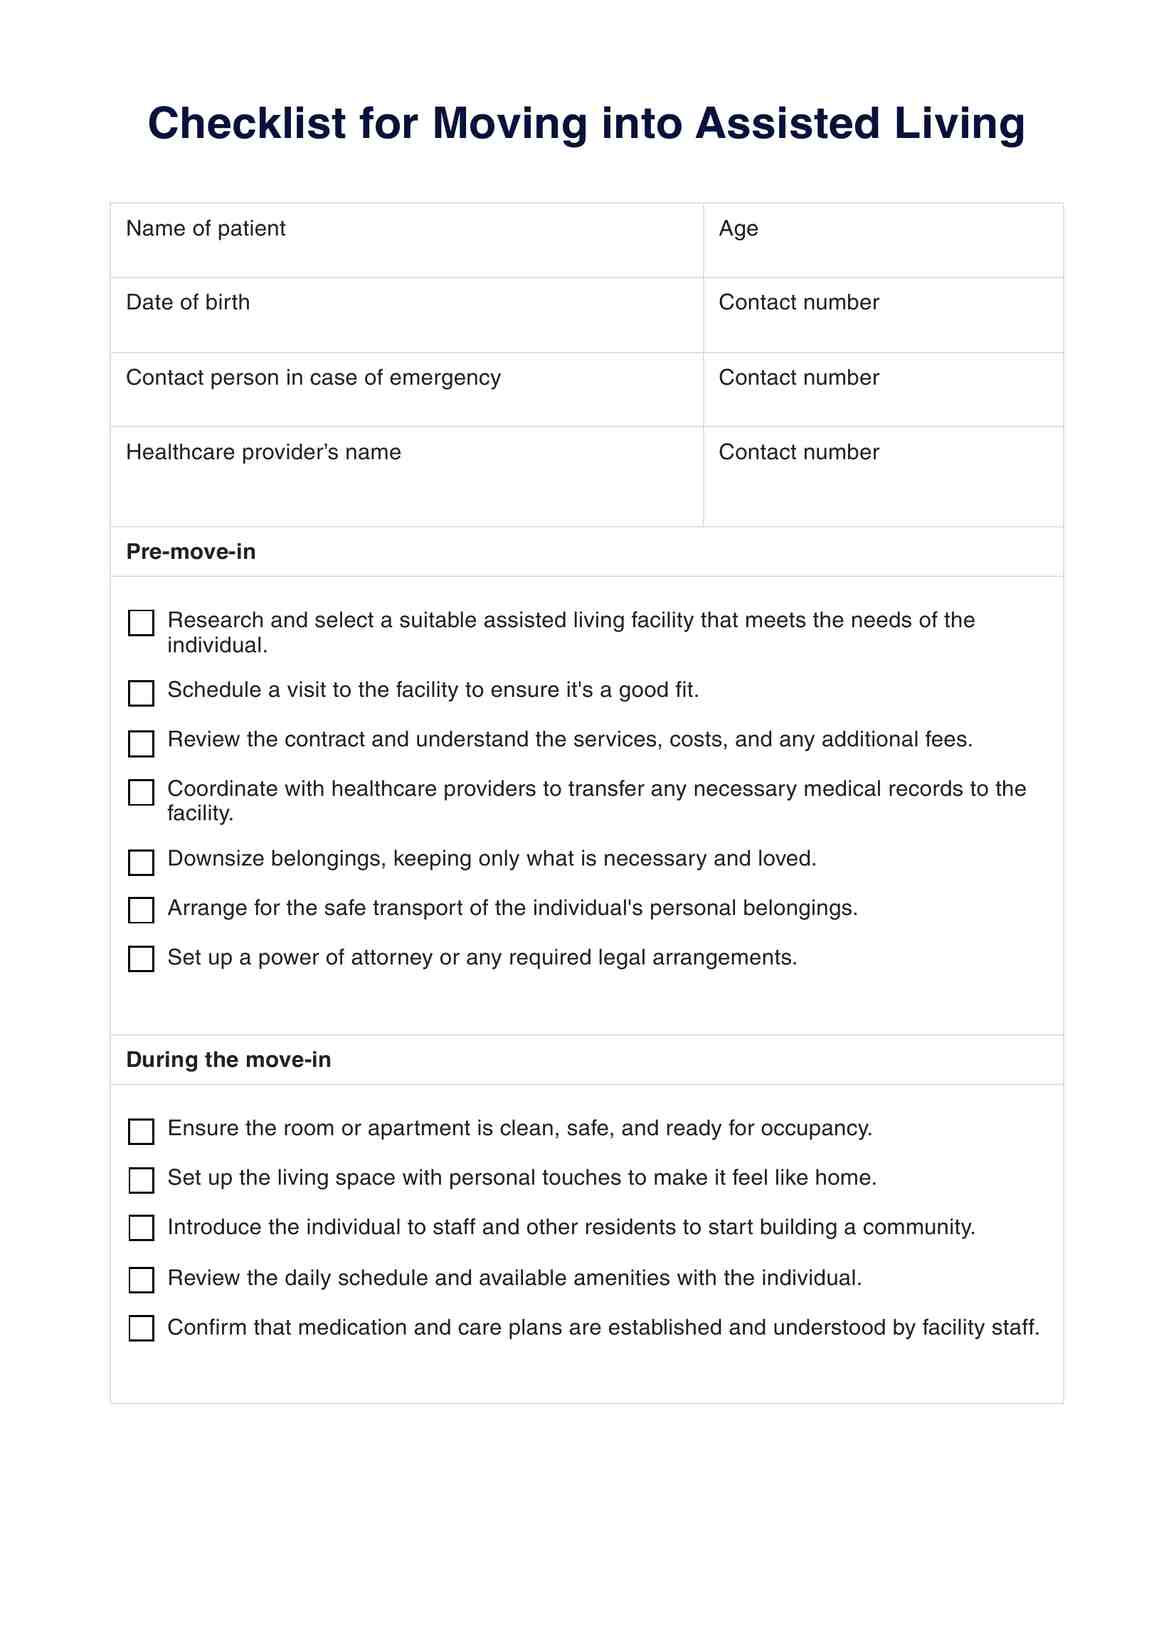 Checklist for Moving into Assisted Living PDF Example